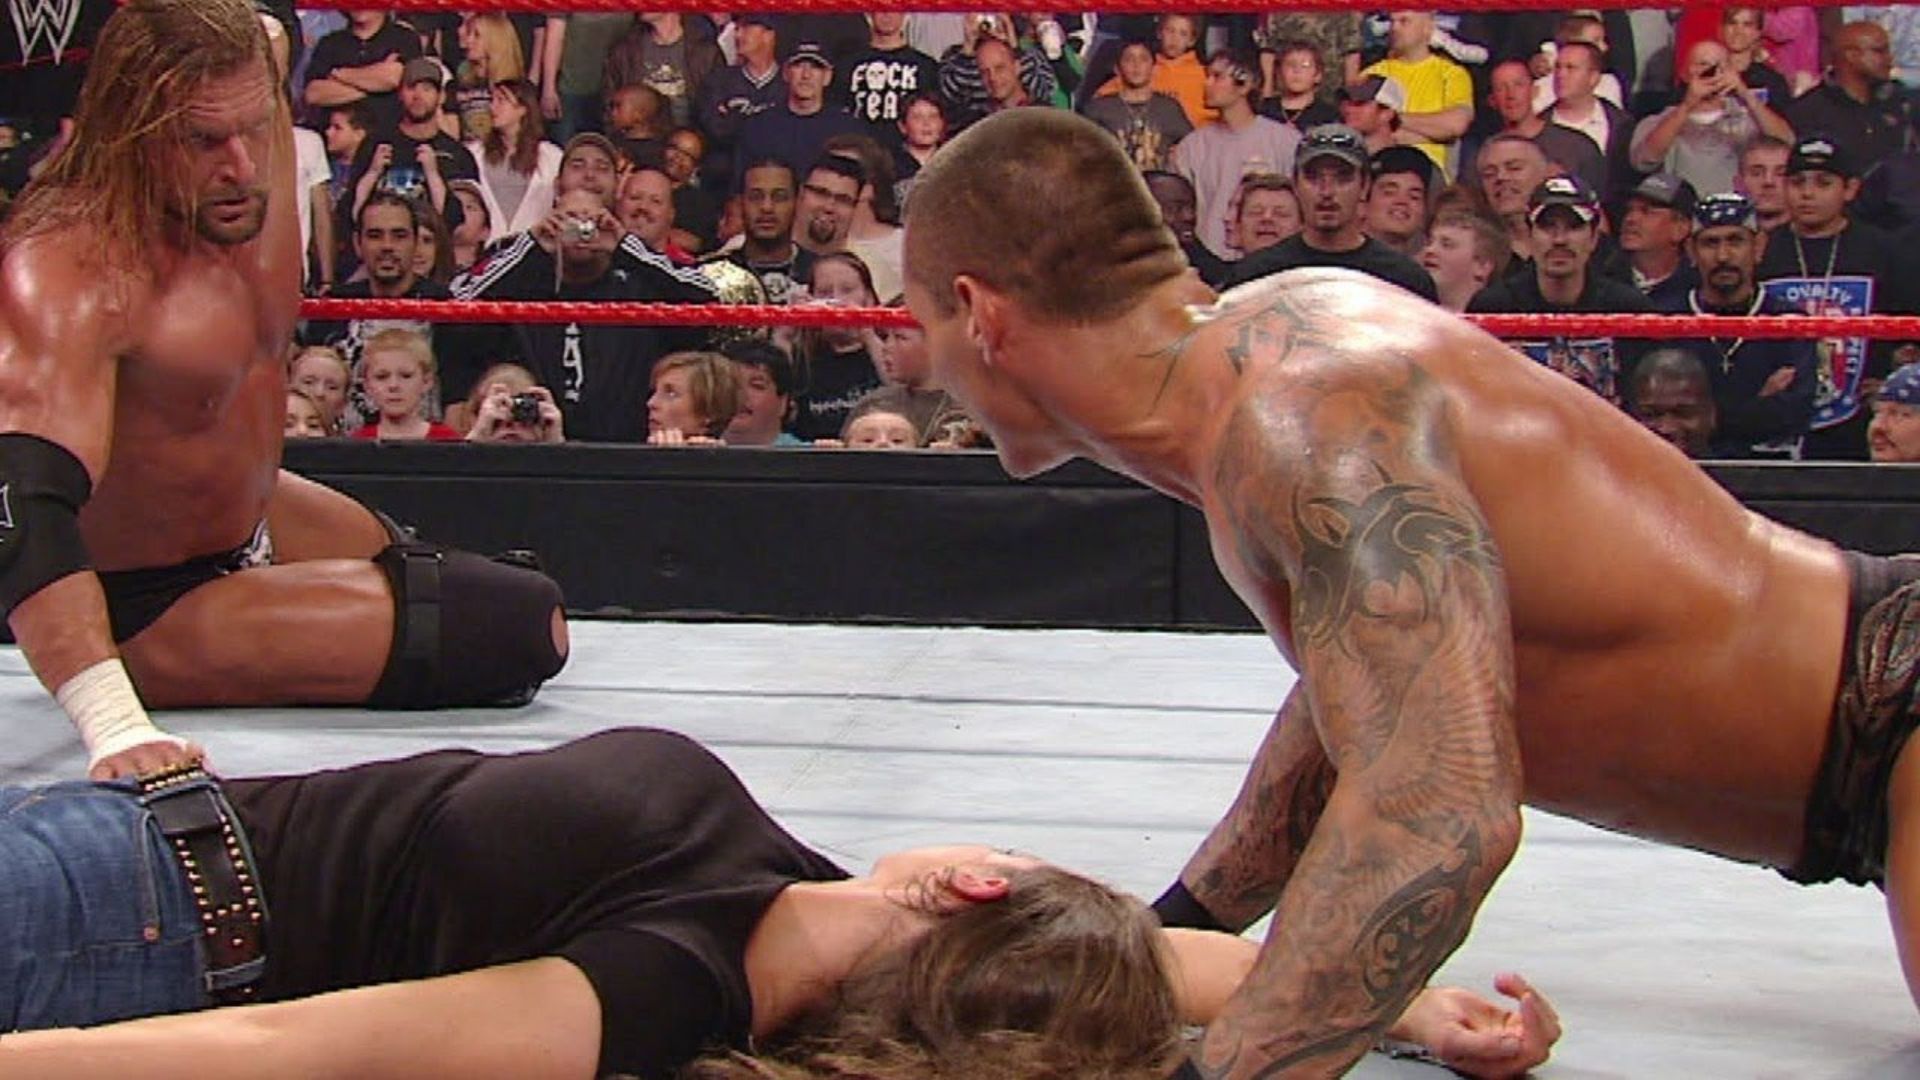 Randy Orton kissed Stephanie McMahon in front of Triple H